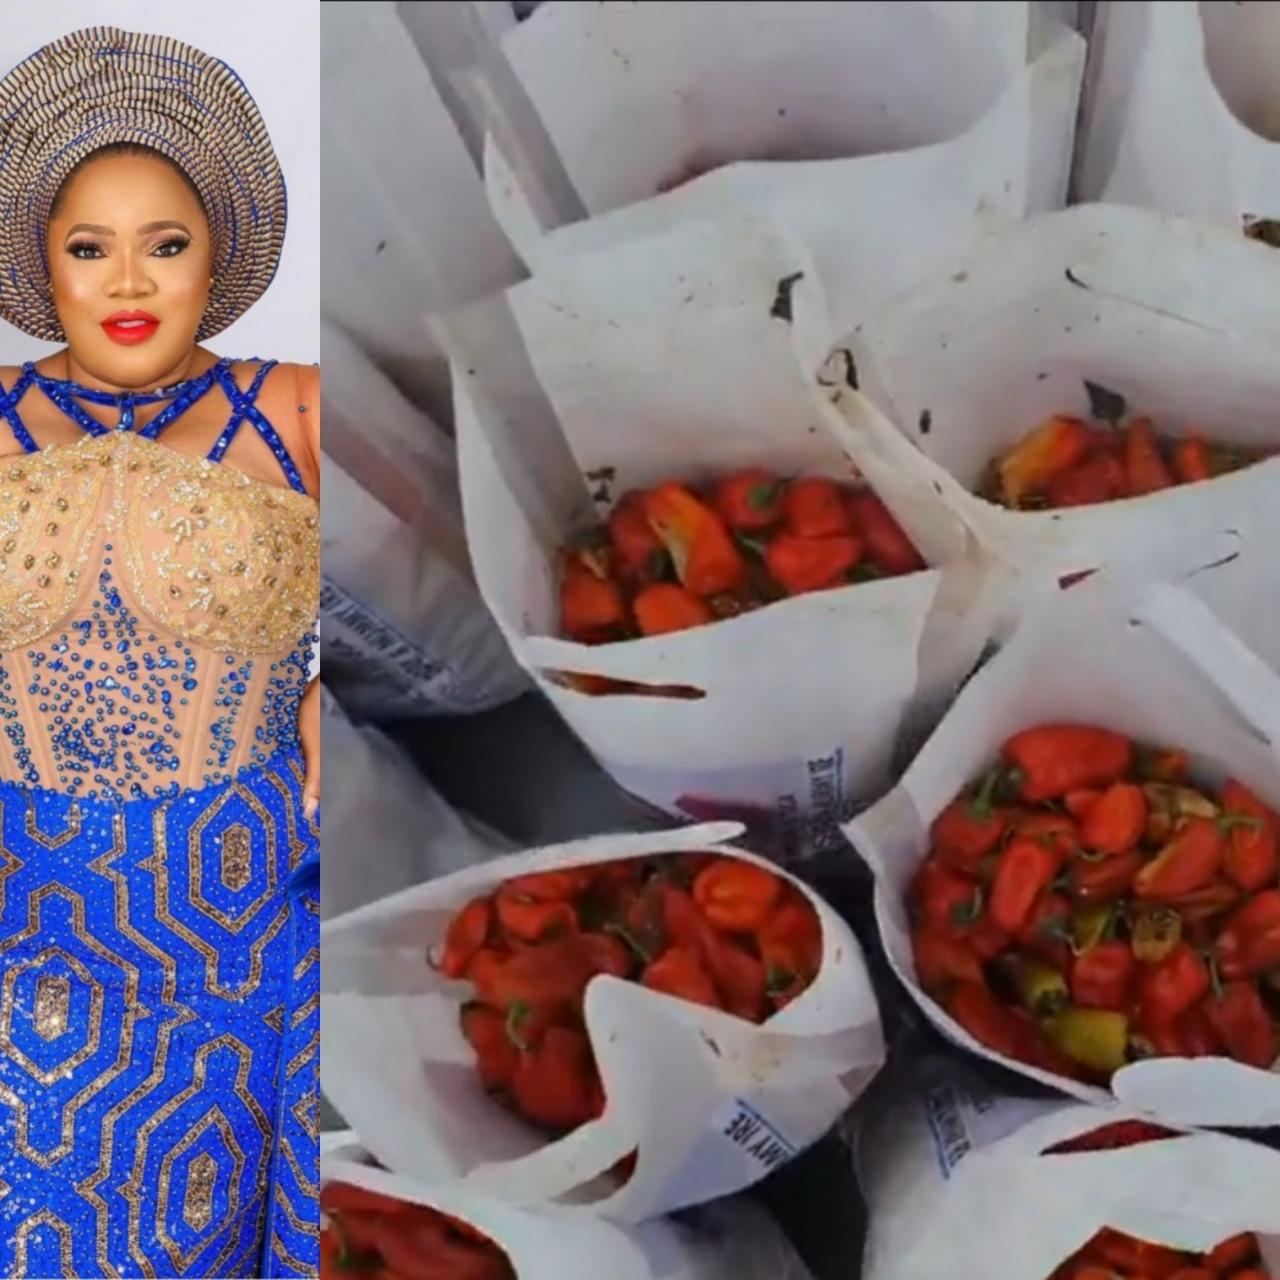 Toyin Abraham shared bags of red pepper to guests at Iyabo Ojo